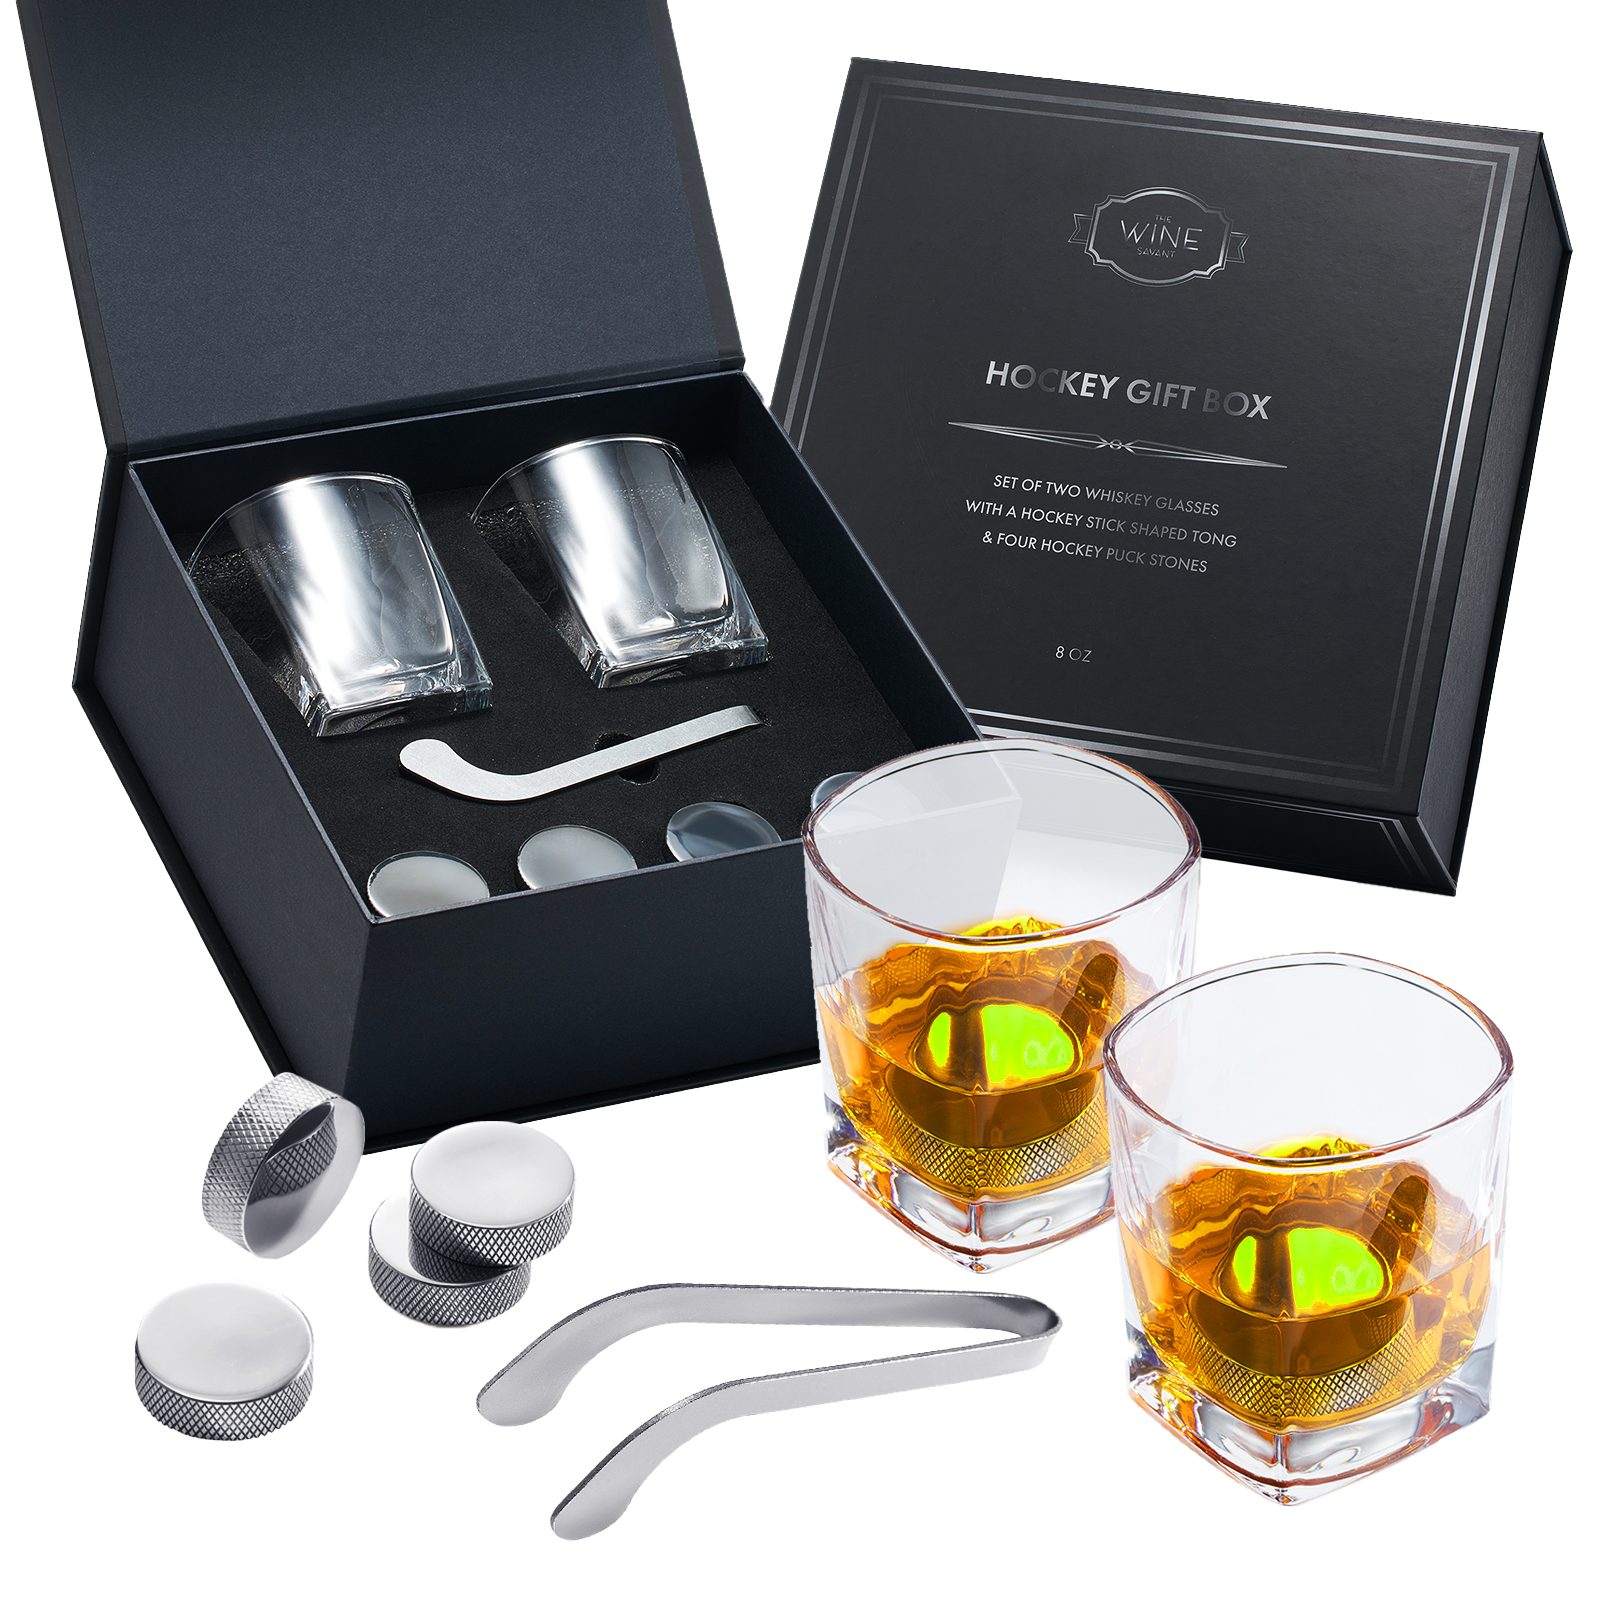 Bullet Whiskey Chillers Stones - 1.75in Whiskey Rocks by The Wine Savant  Set of 6 - Stainless Steel Bullet Shaped Ice Cubes, Gift Box Come, Tongs  and